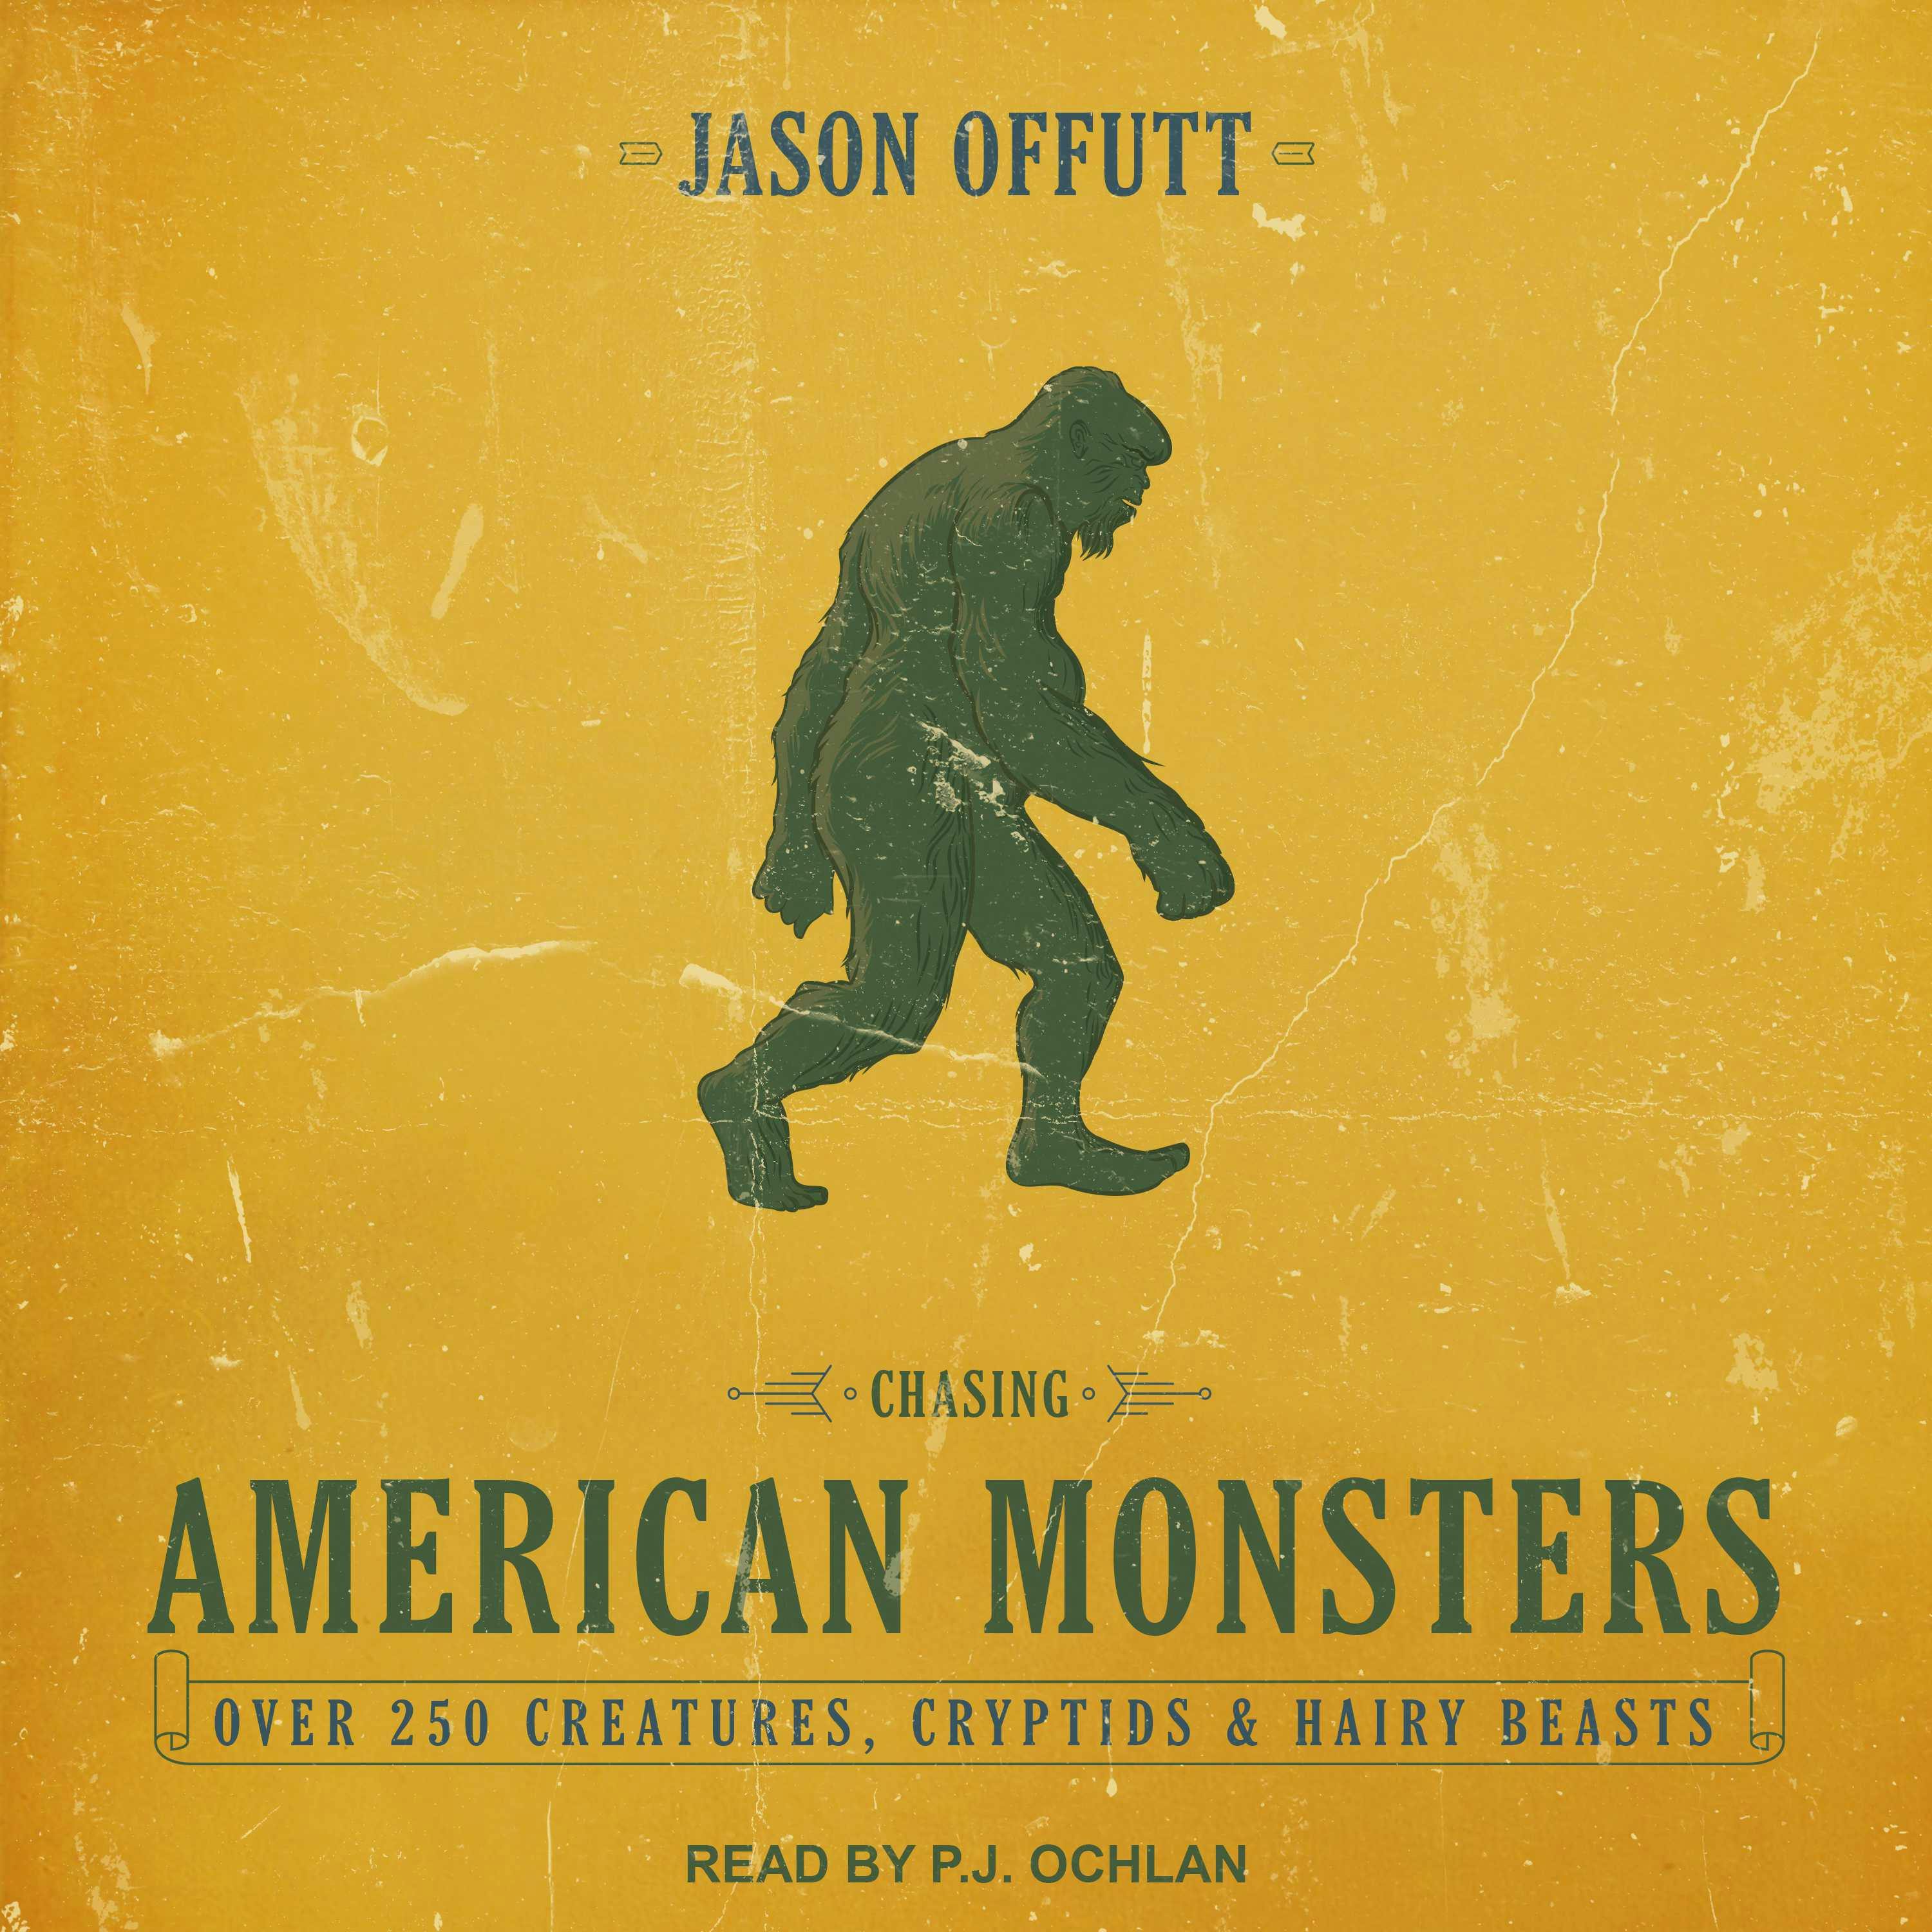 Chasing American Monsters: Over 250 Creatures, Cryptids & Hairy Beasts - Jason Offutt